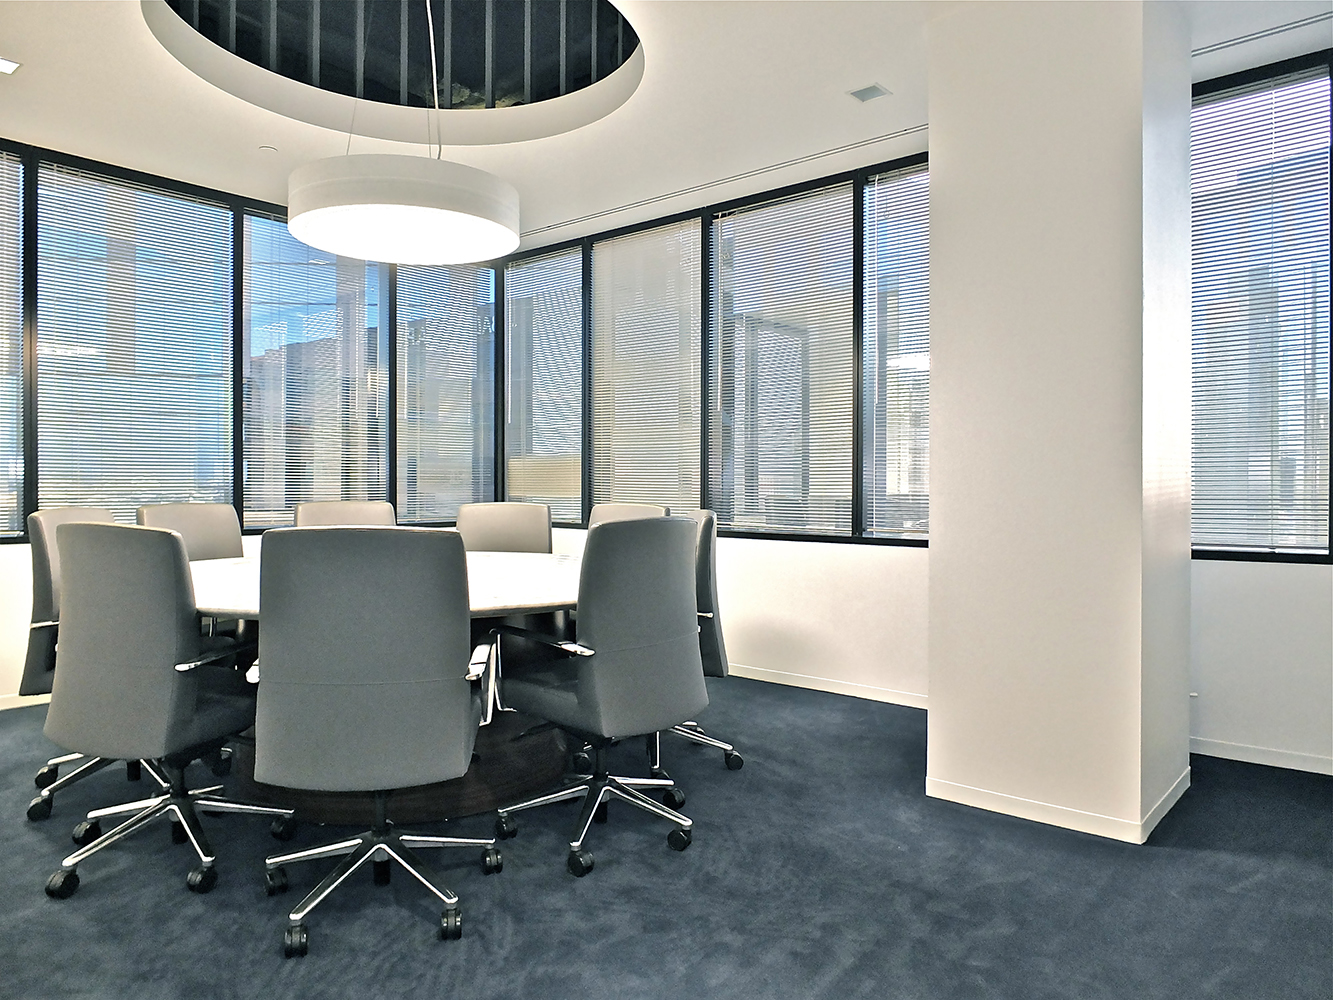 Omnience office lighting fixtures are perfect for conference tables, seen here above a small round table near large windows.